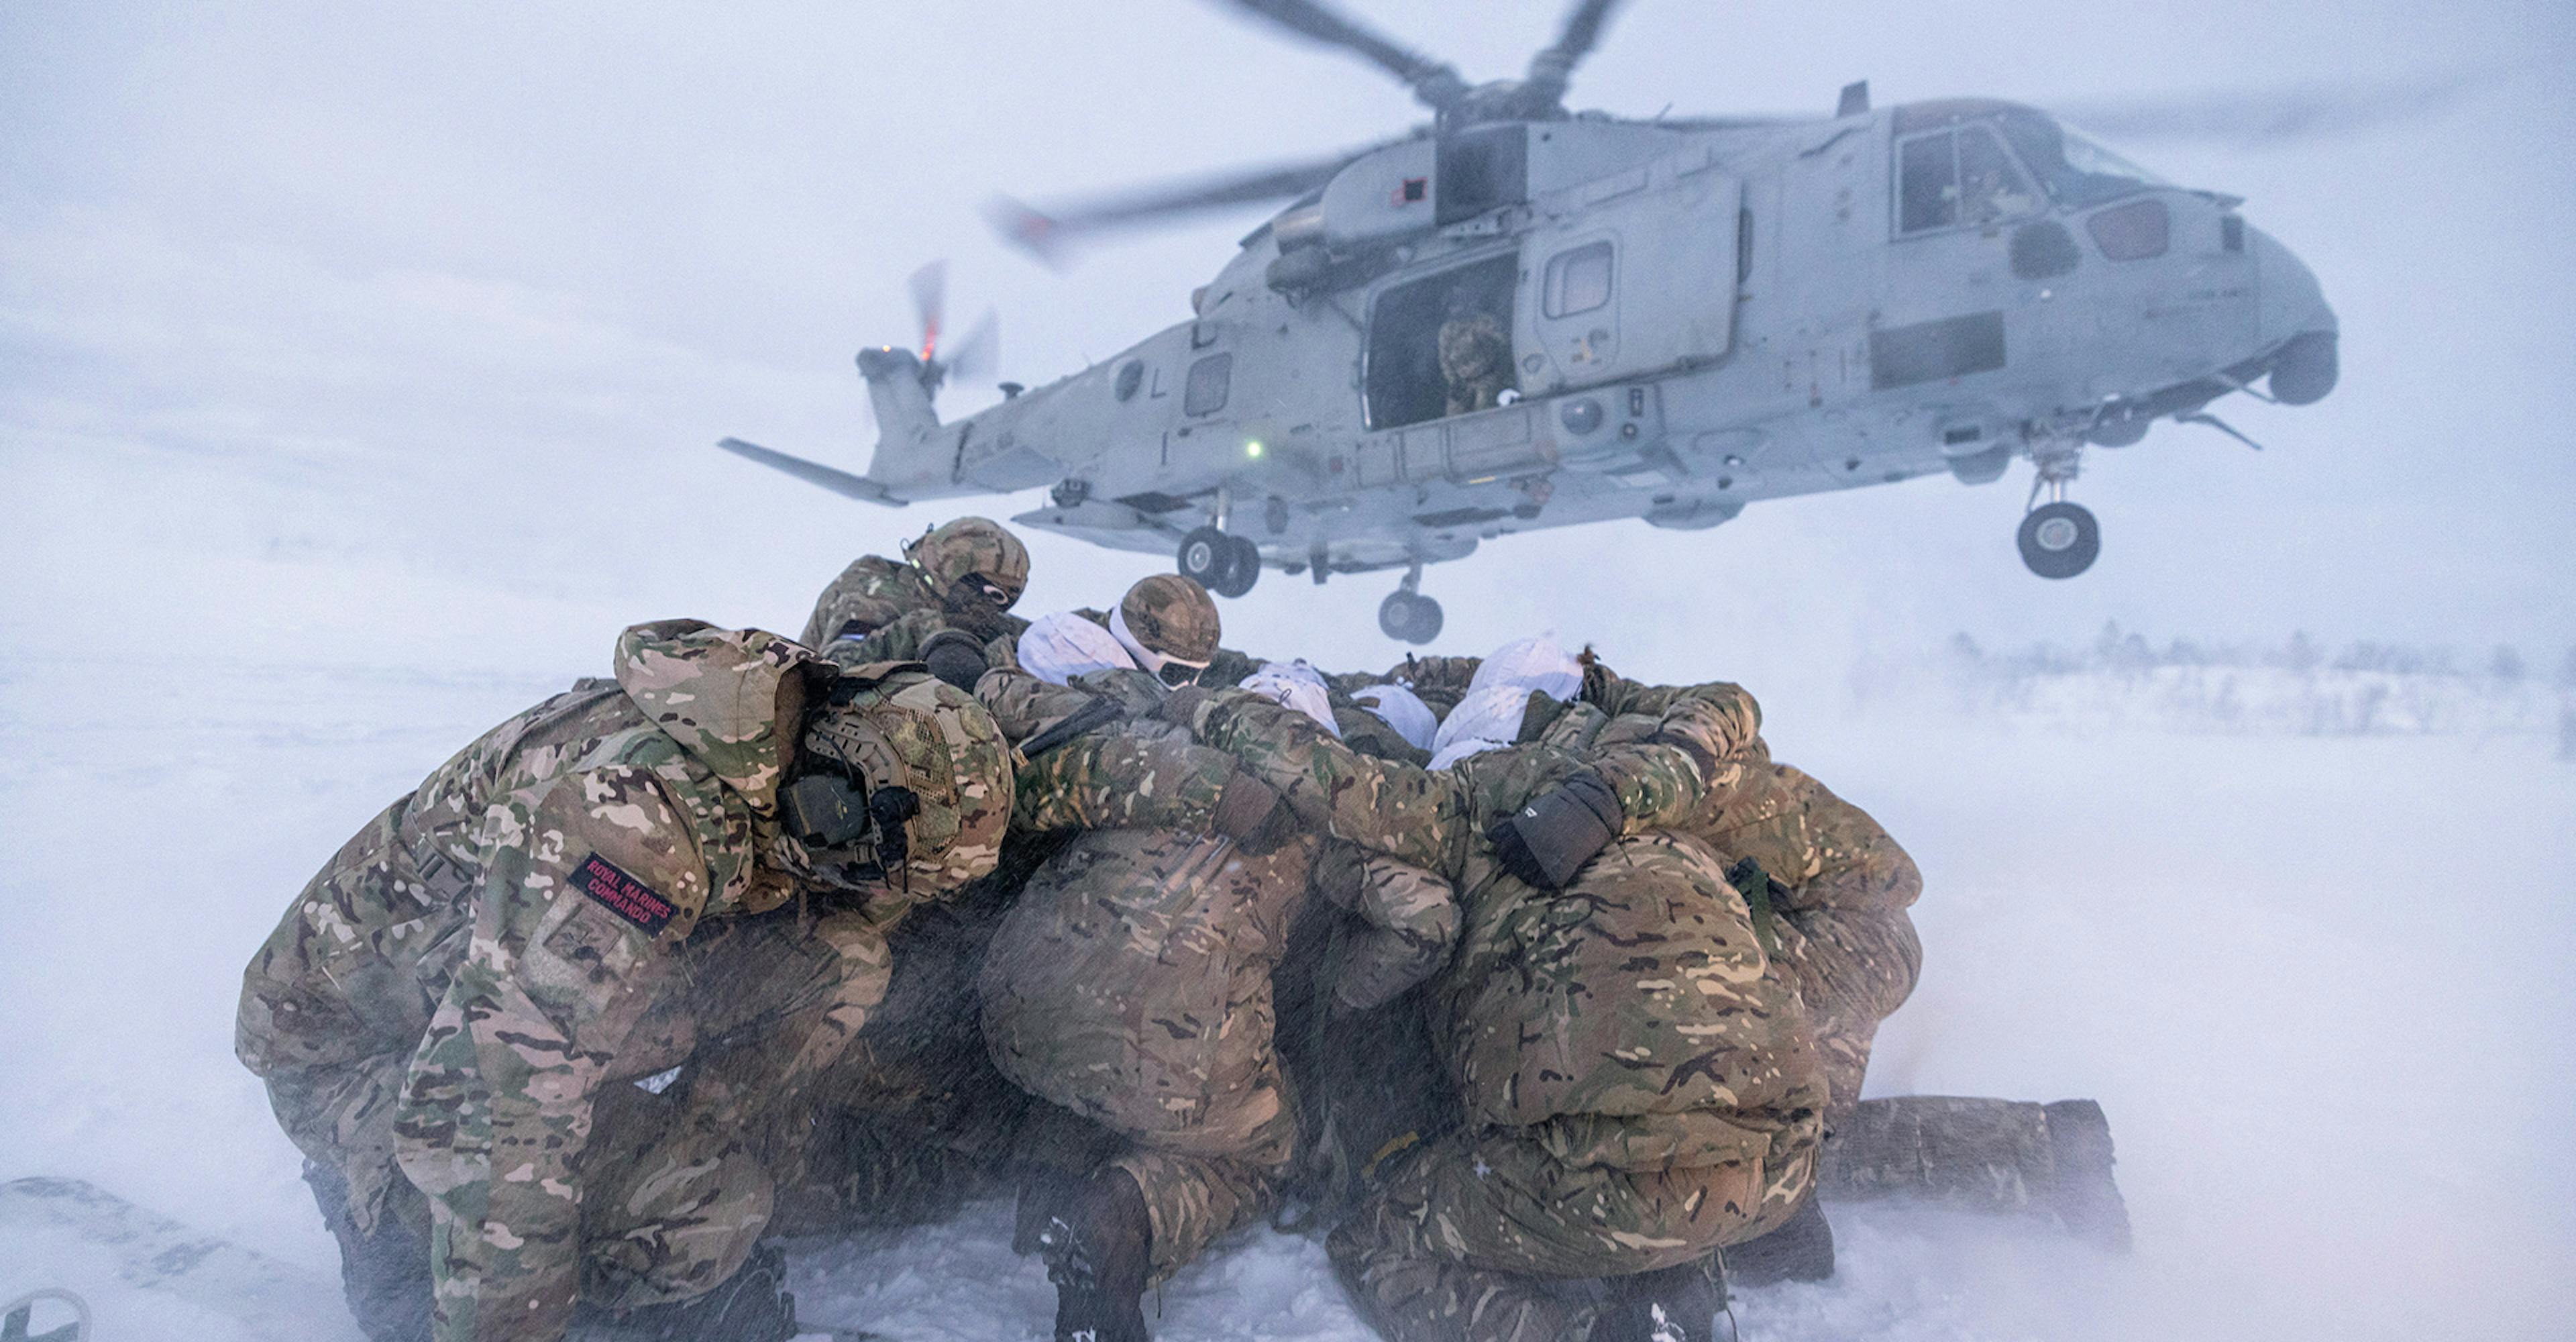 Soldiers in snow with helicopter in background.